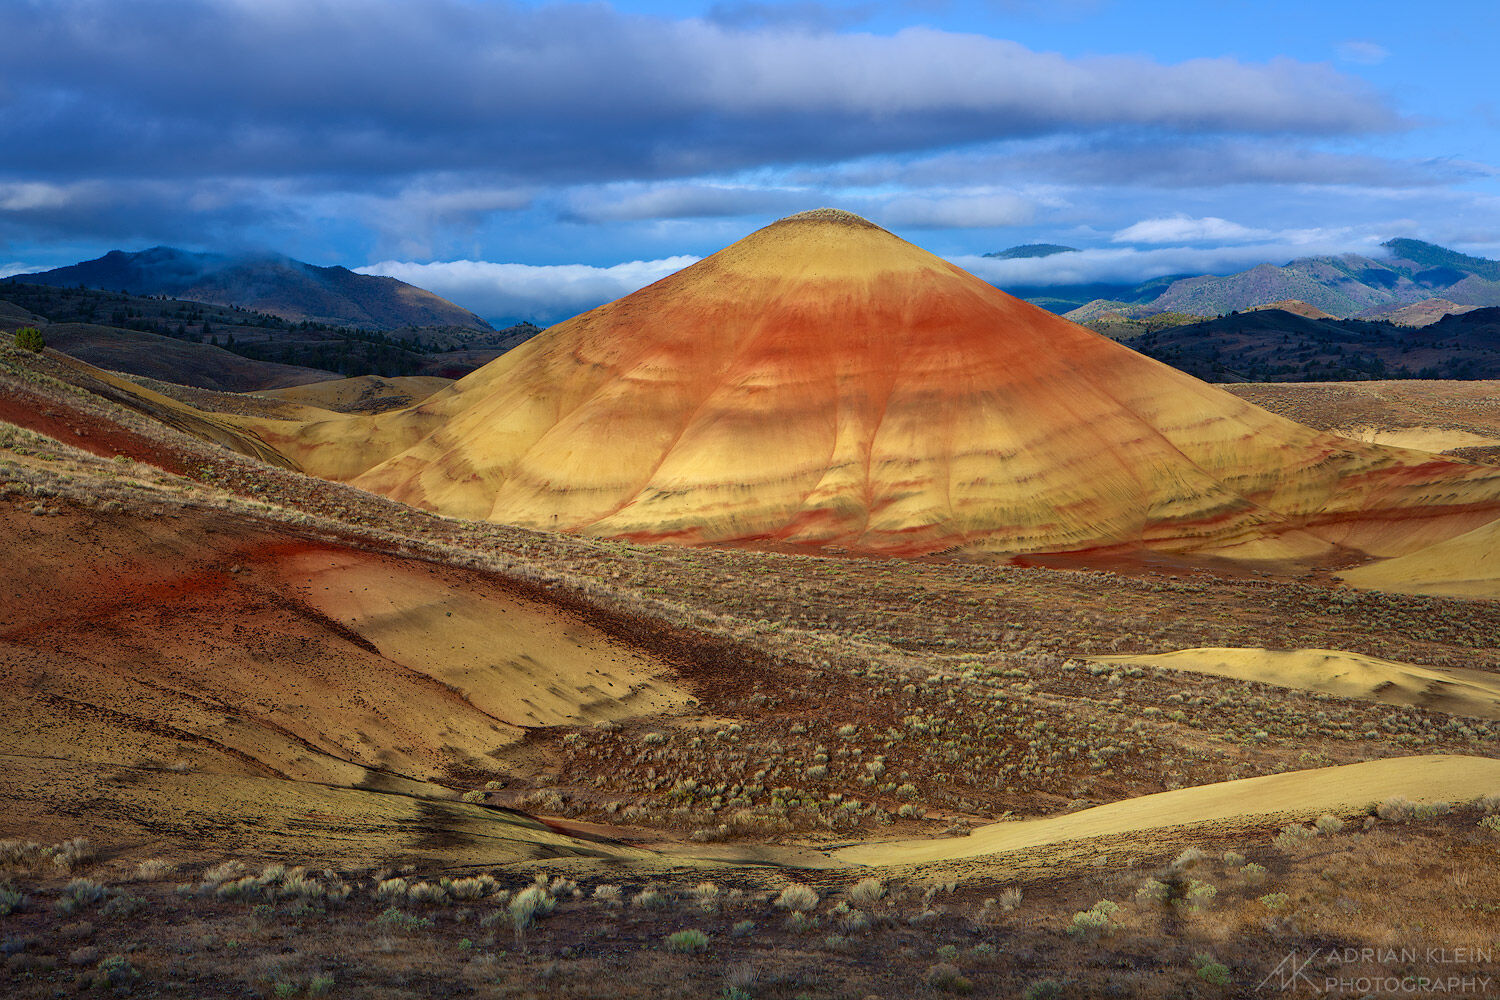 The Painted Hills in Central Oregon just after stormy sunrise